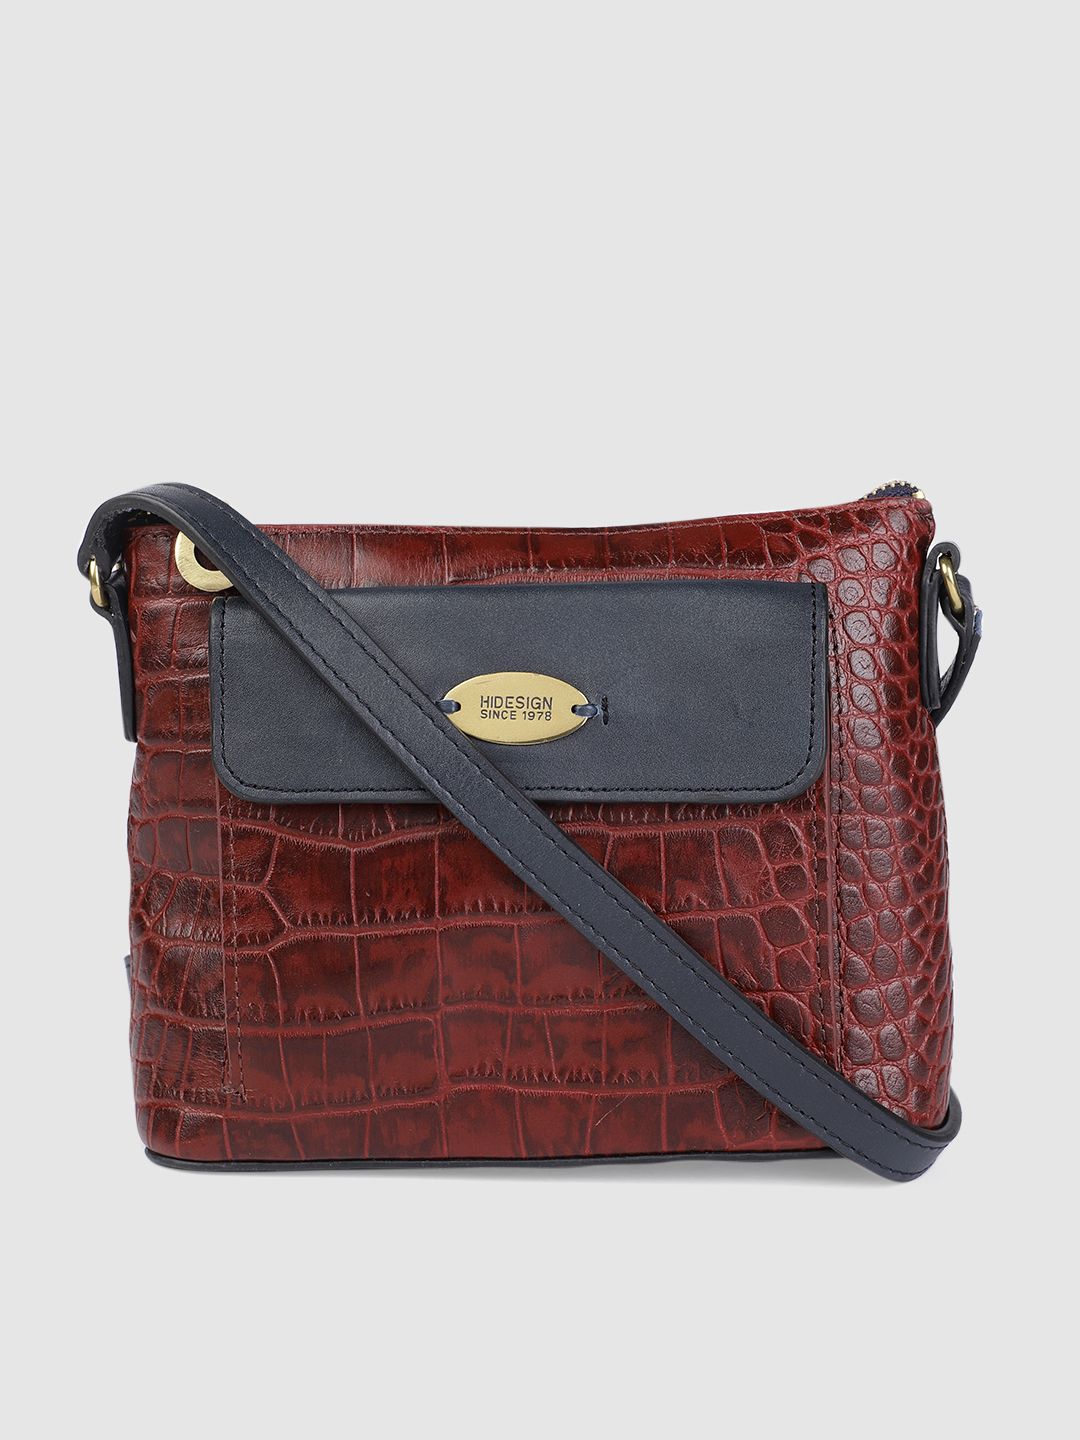 Hidesign Maroon Textured Leather Sling Bag Price in India